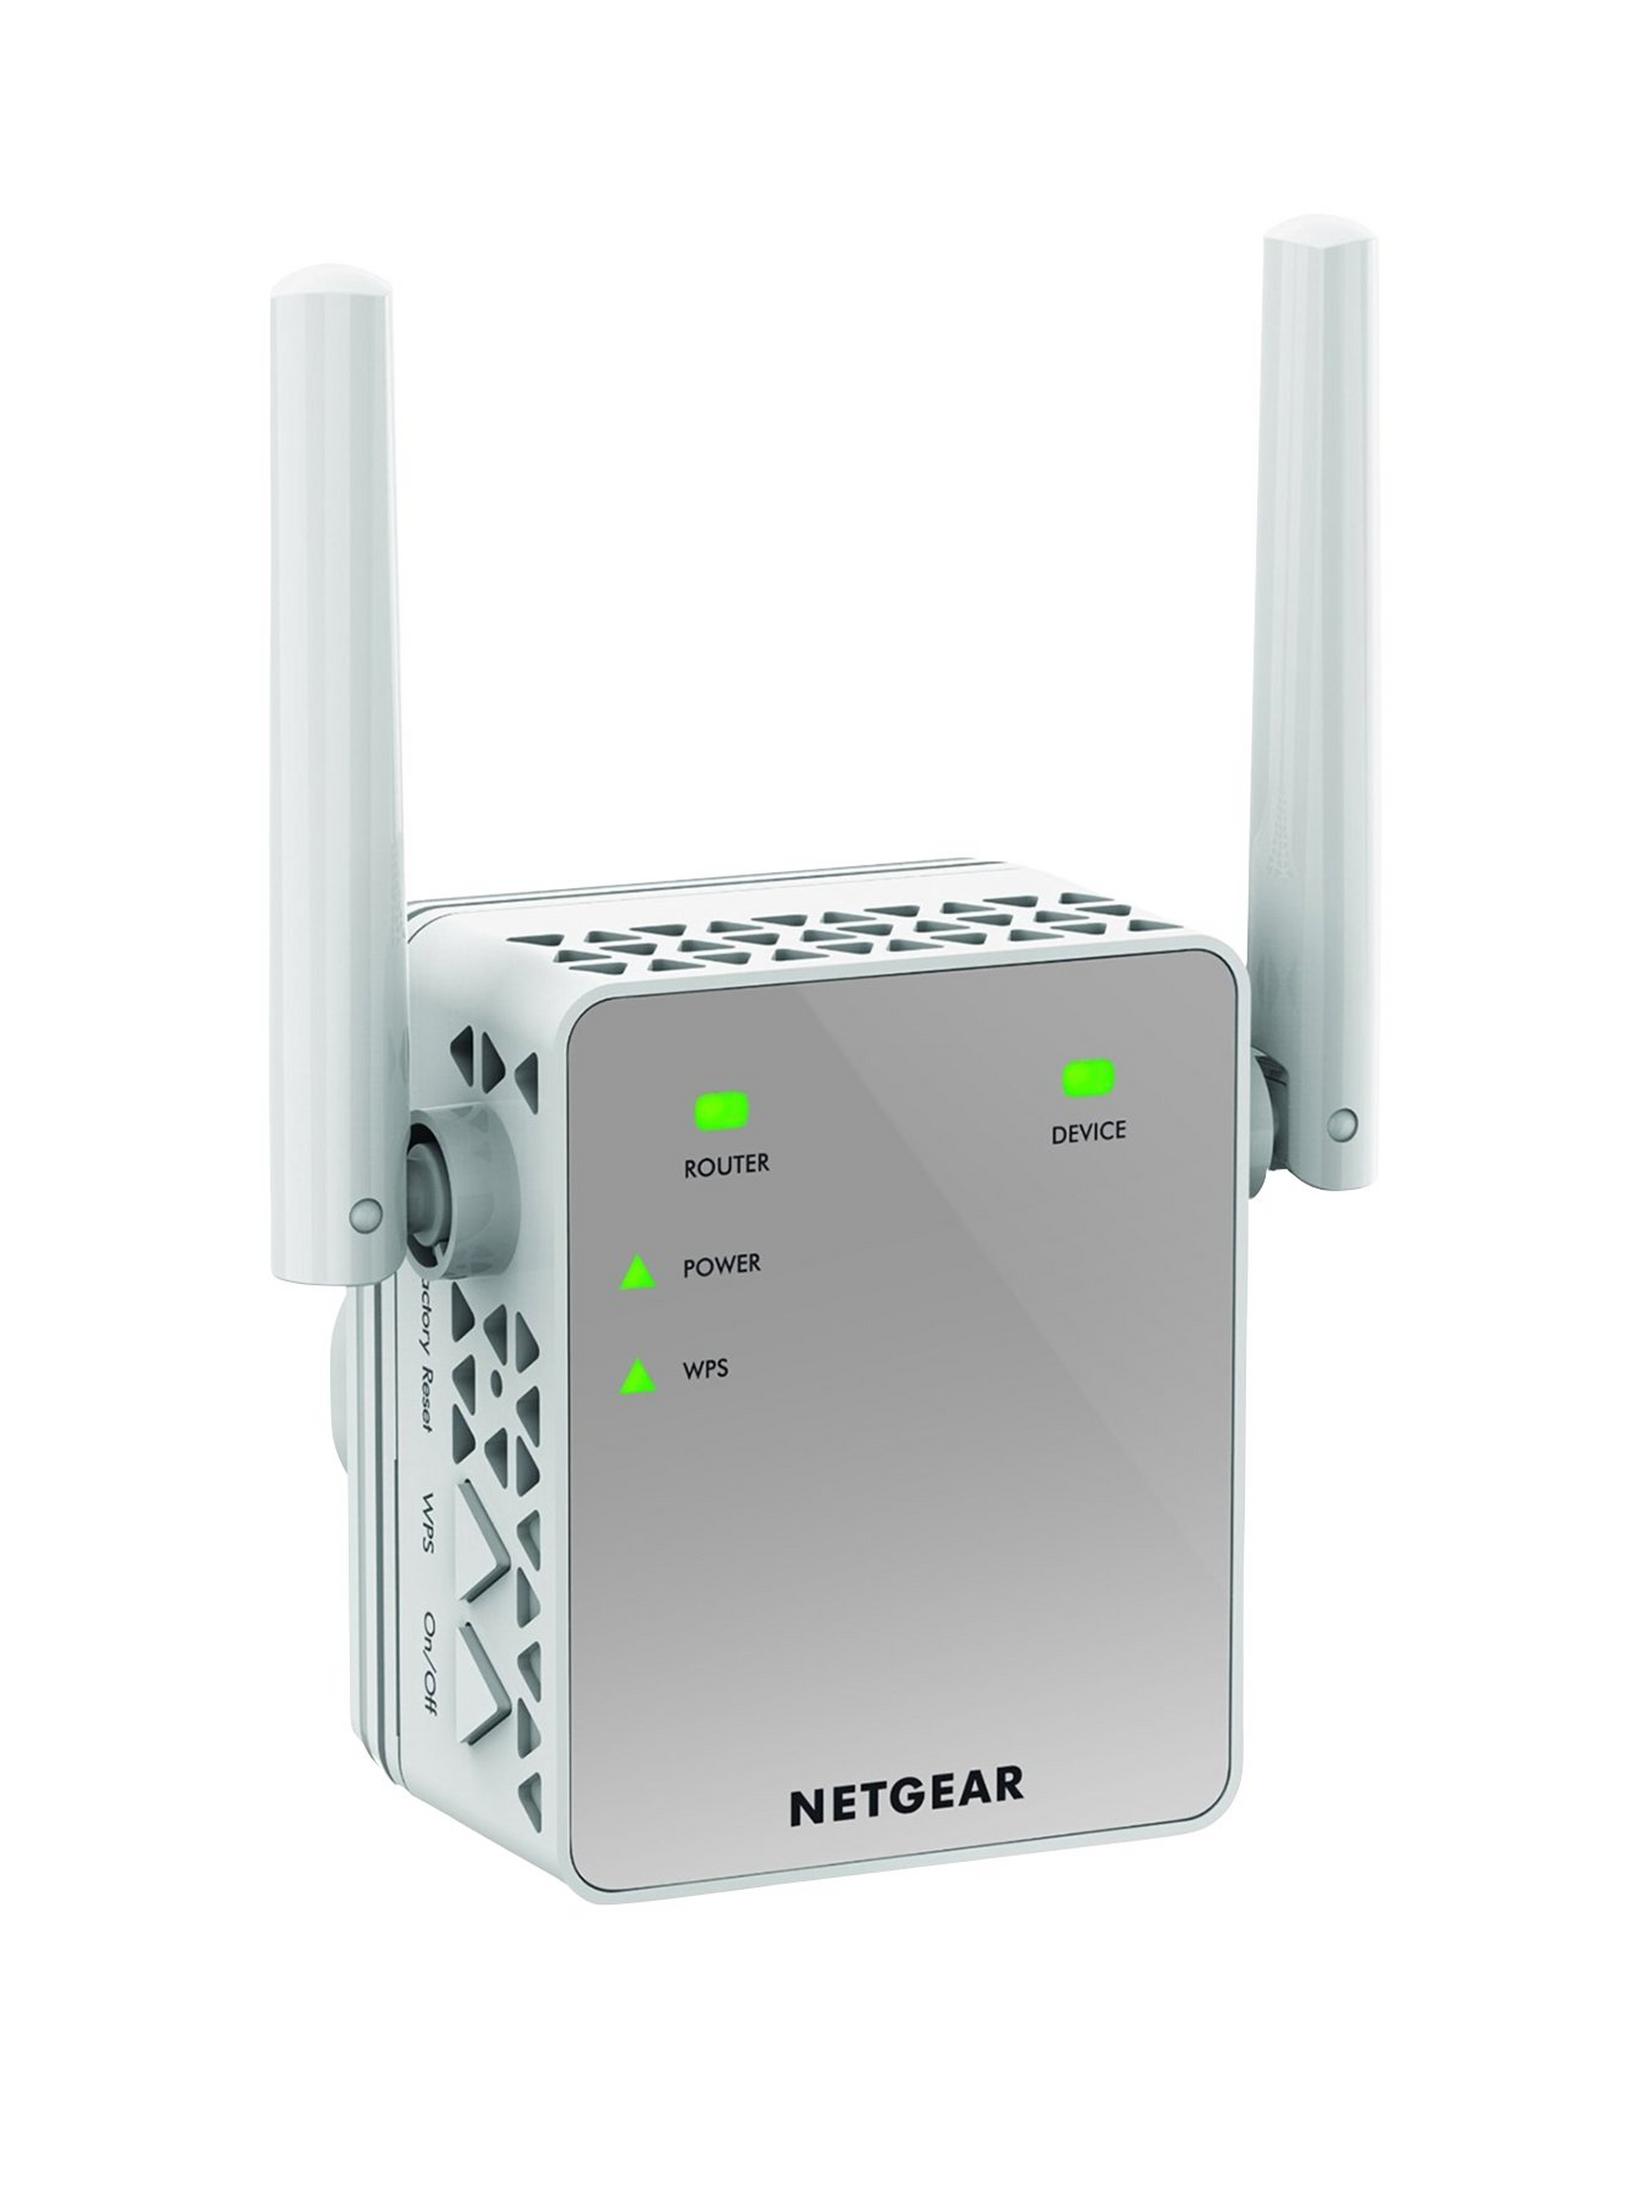 NetgearWi-Fi Booster Range Extender EX3700 – Coverage Up-to 1000 sq ft and 15 Devices with AC750 Dual Band Wireless Signal Repeater £40 post thumbnail image